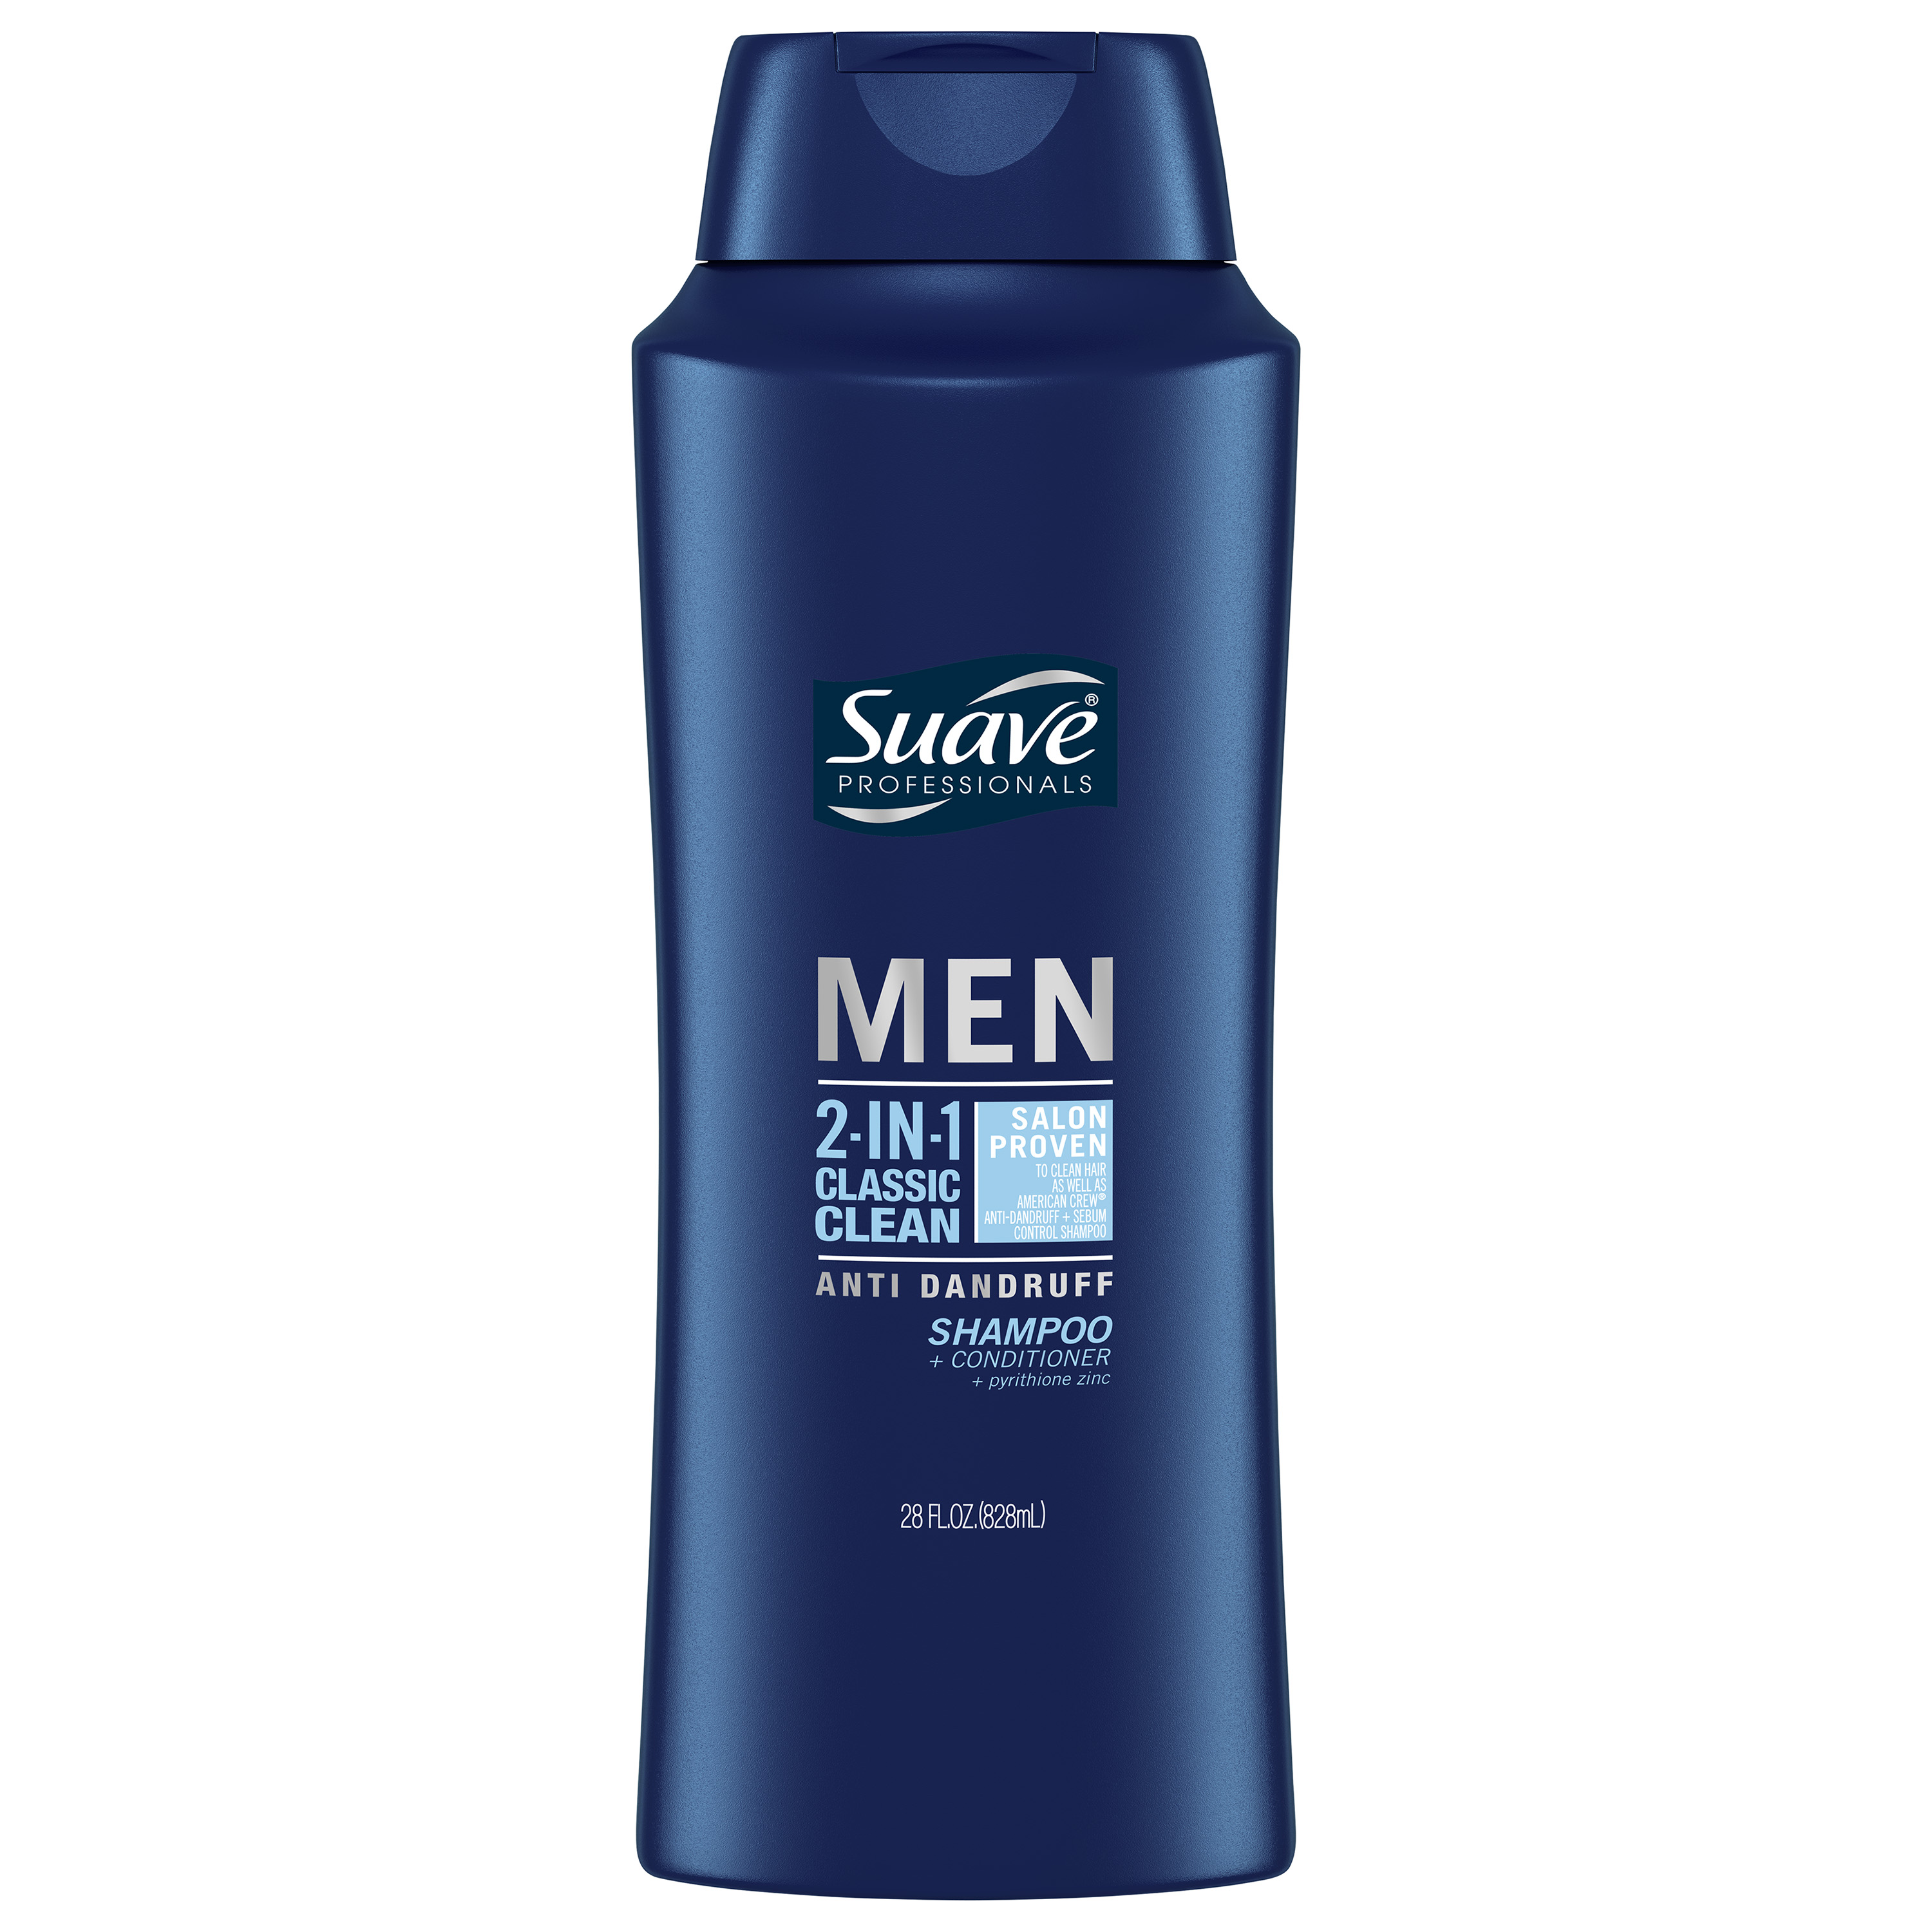 (2 pack) (2 Pack) Suave Men Classic Clean 2in1 AntiDandruff Shampoo & Conditioner, 28 oz - image 1 of 6